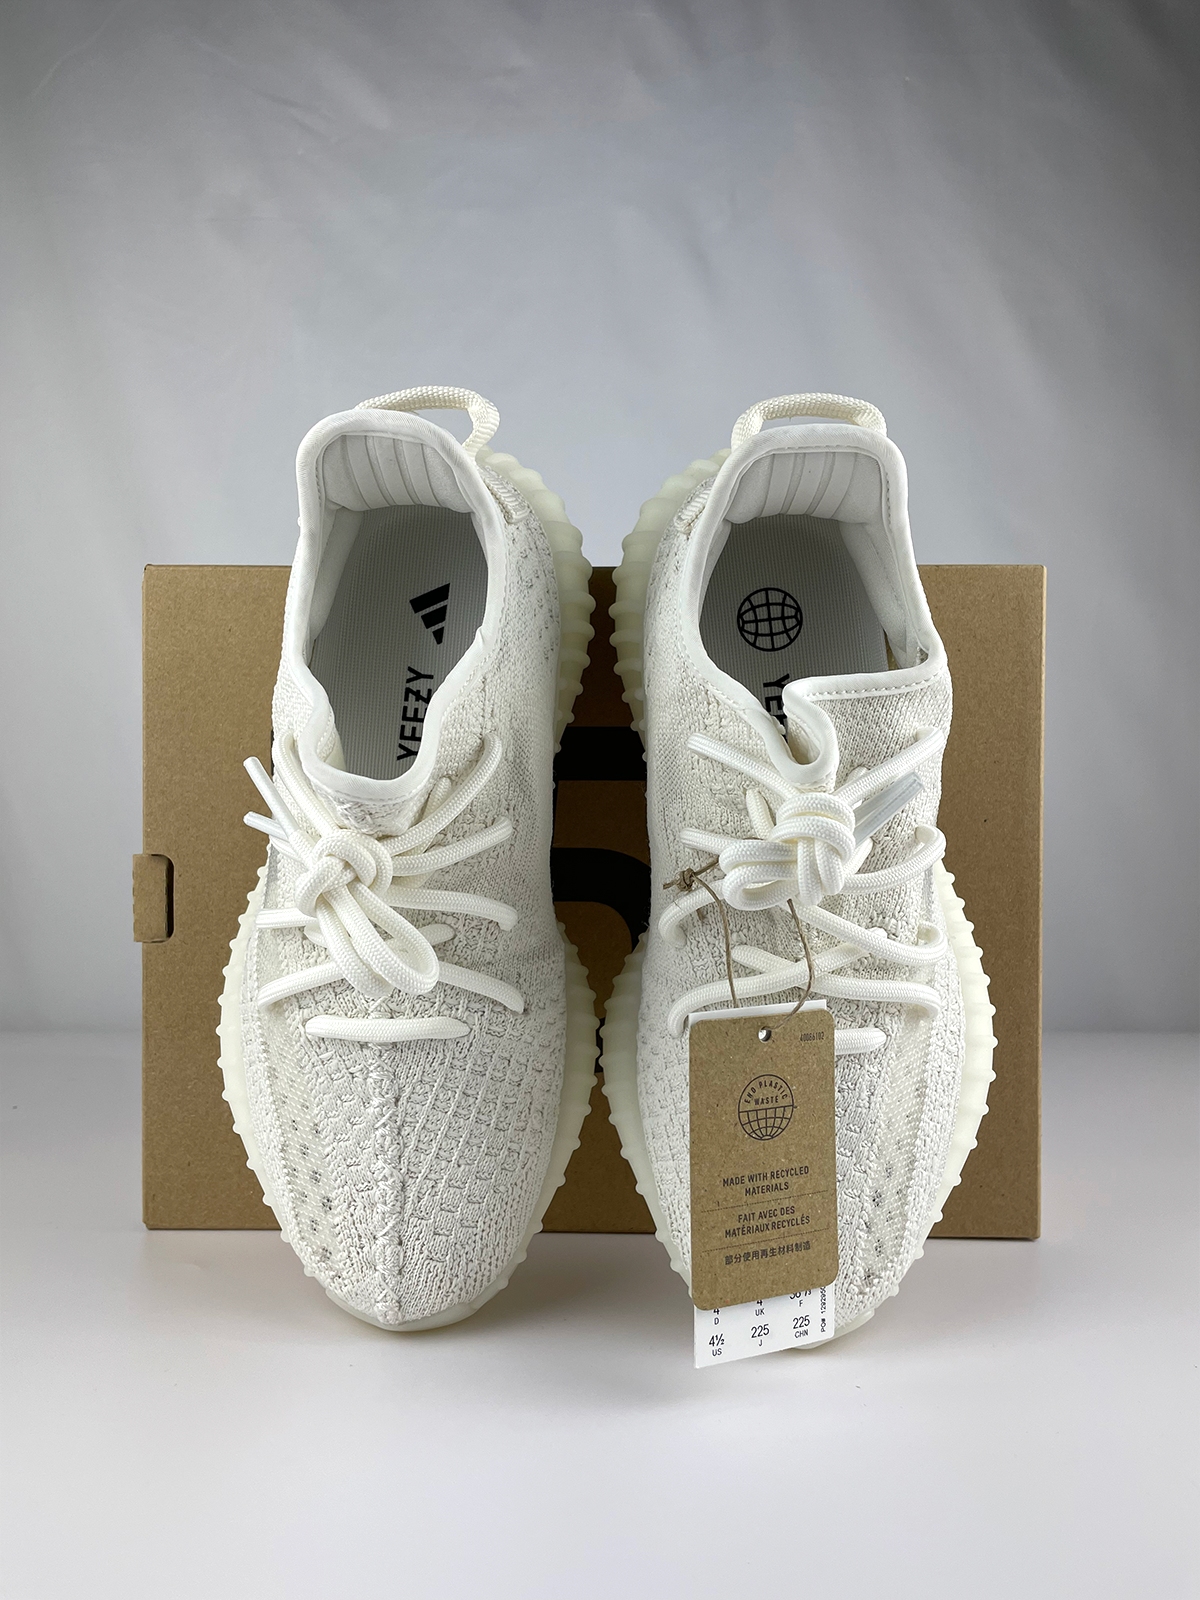 Yeezy Boost 350 V2 Bone for Sale, Authenticity Guaranteed